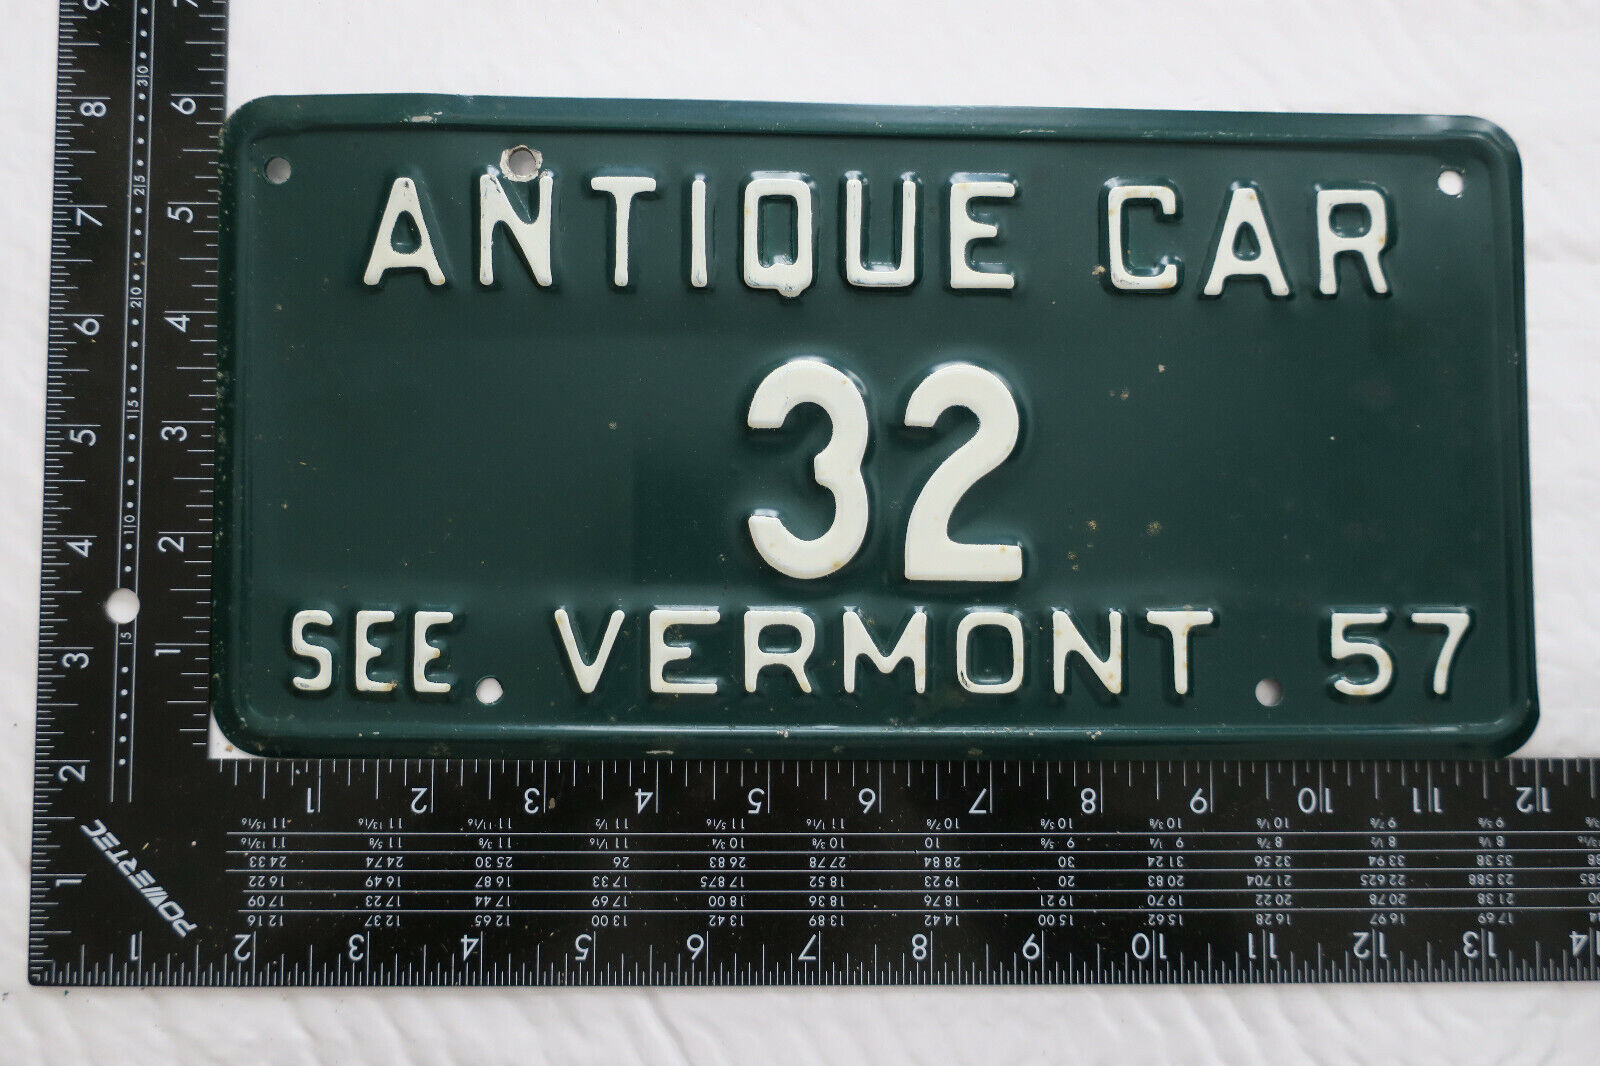 1957 57 Vermont Vt Antique Car Vehicle License Plate Tag #32 First Issue